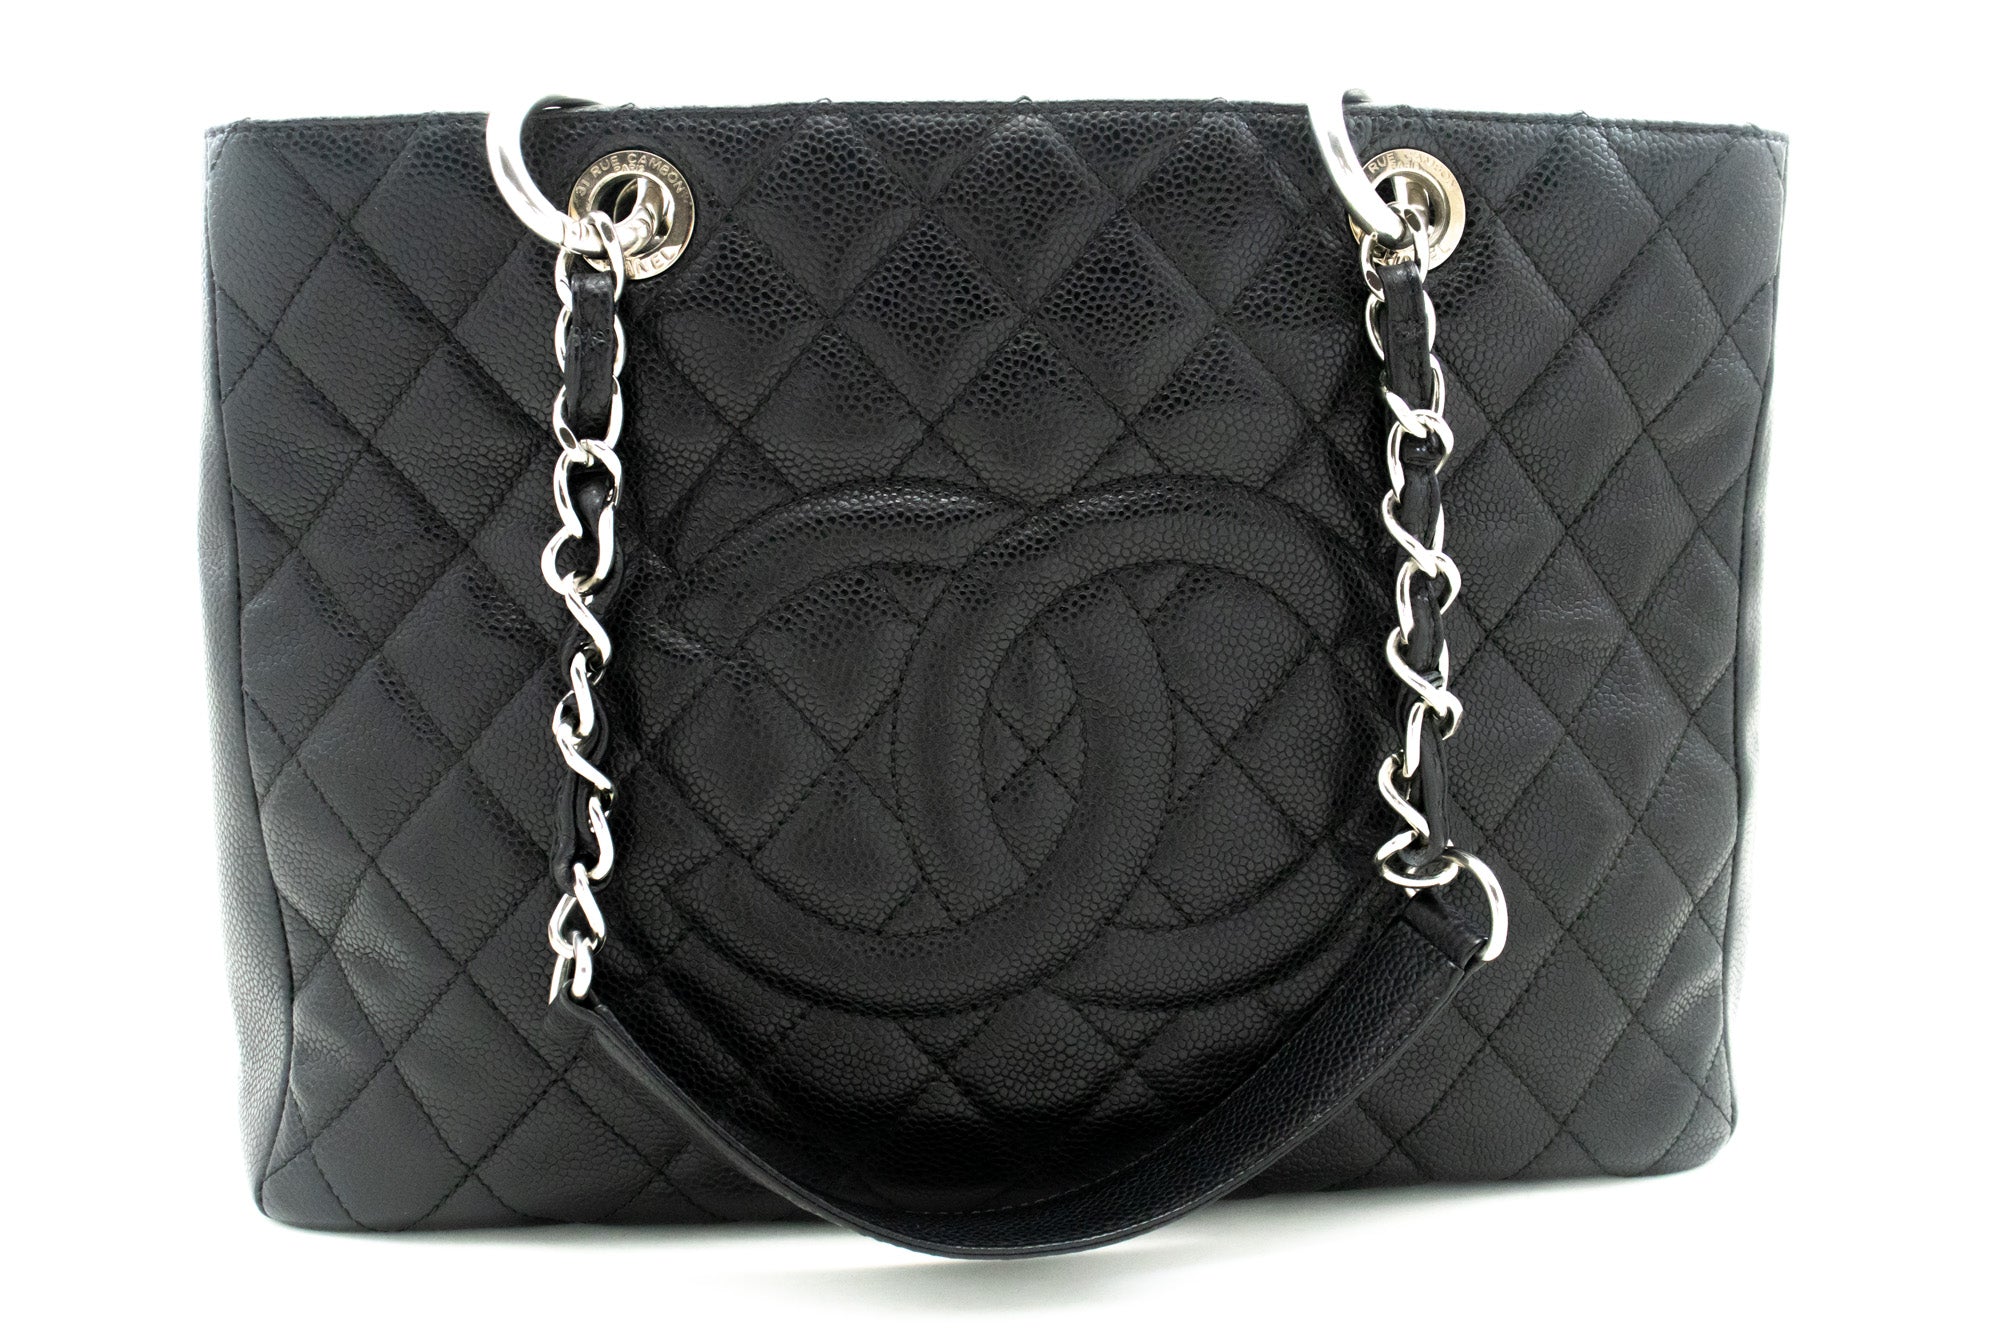 Buy Chanel Shopping Bag Online In India - Etsy India